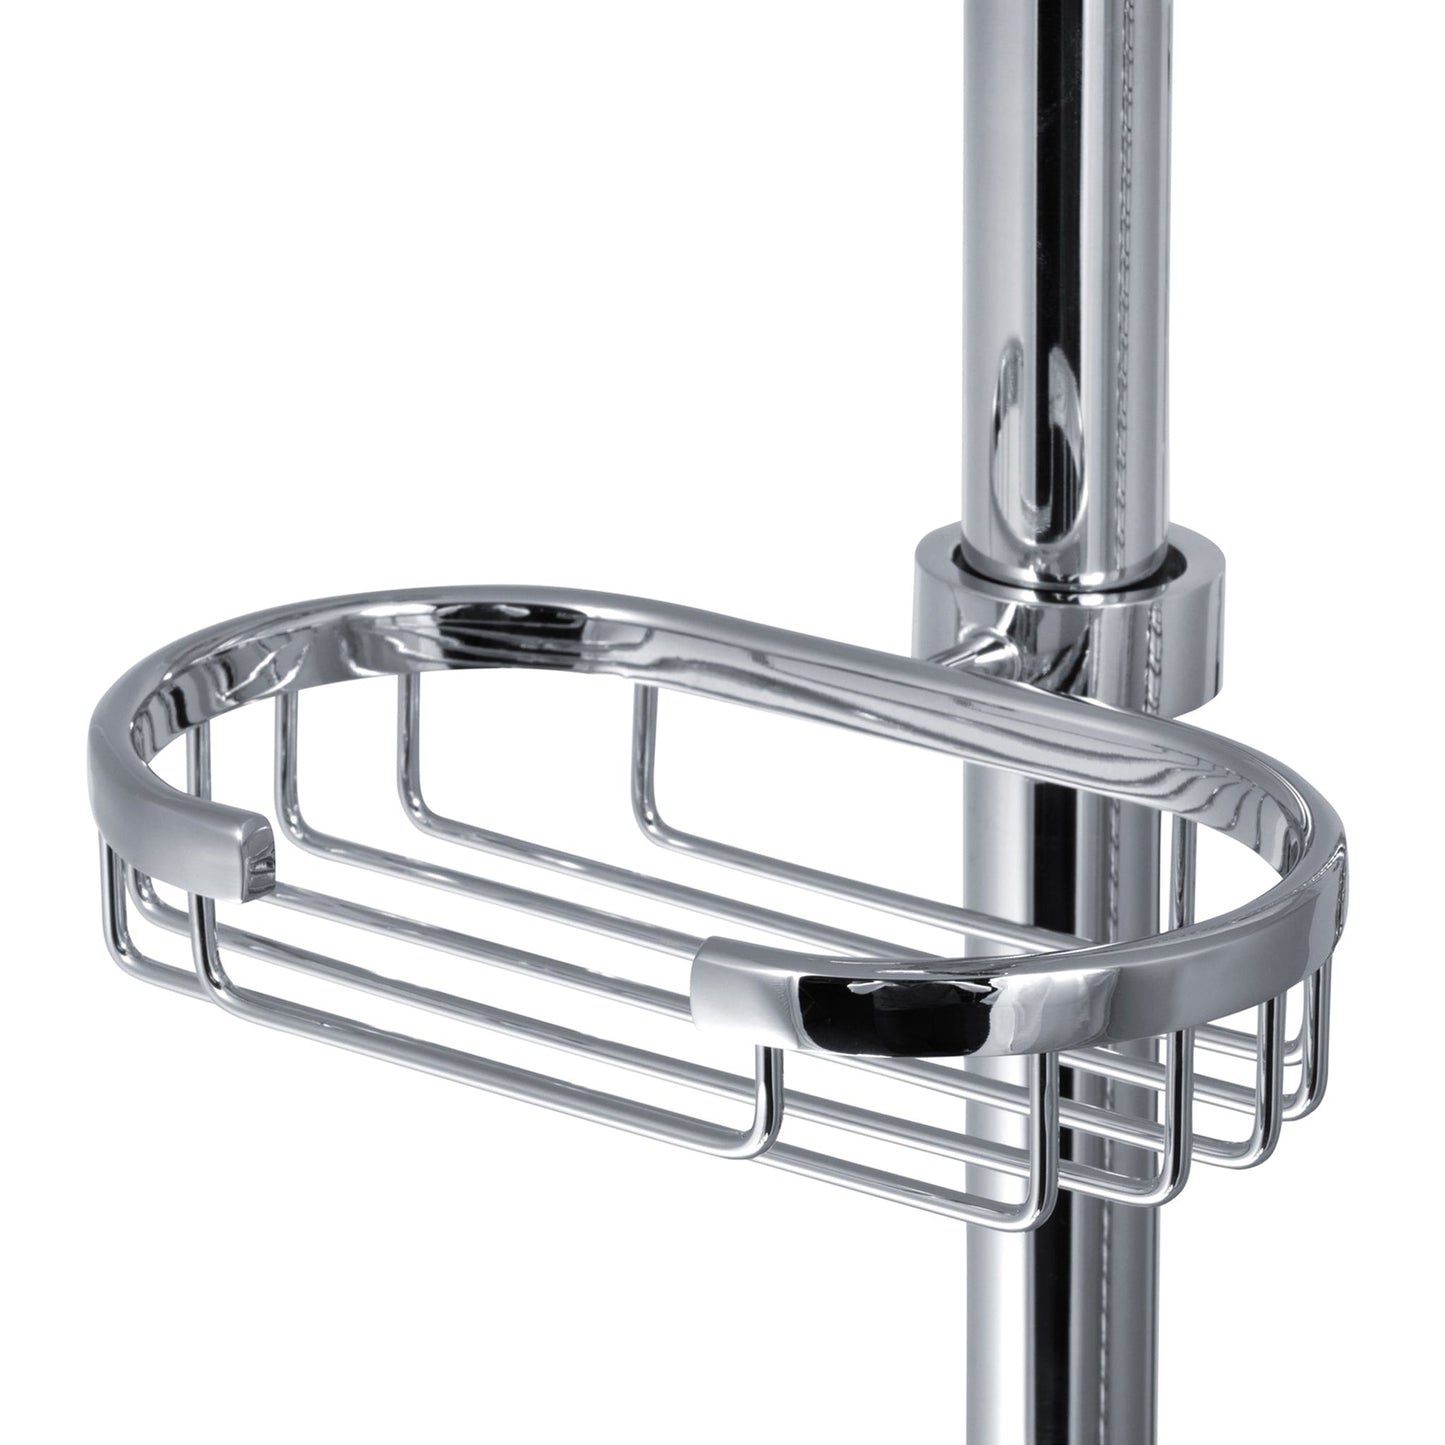 PULSE ShowerSpas Adjustable Slide Bar With Built-in Soap Dish Shower System Accessory in Chrome Finish